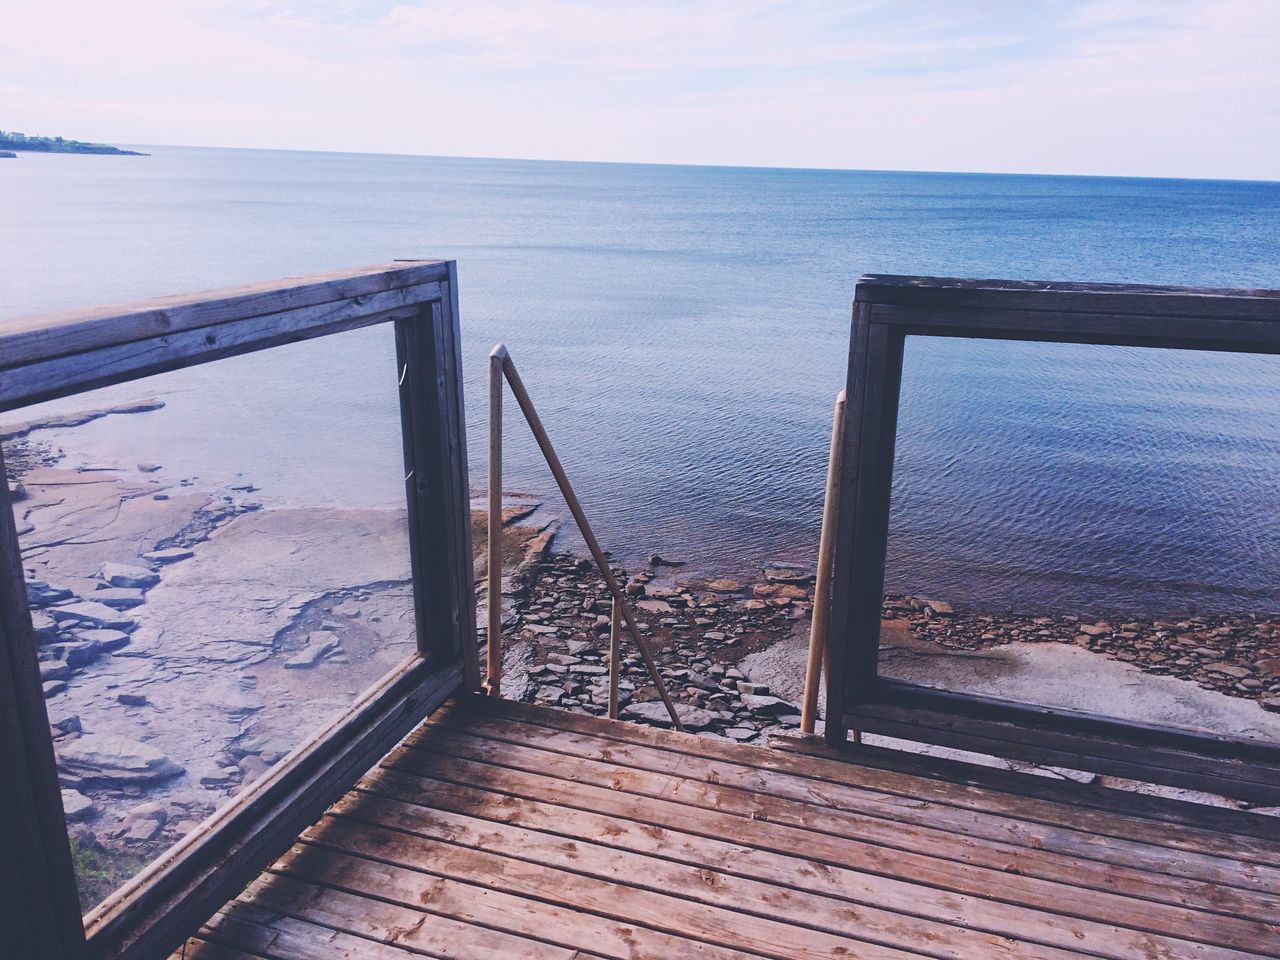 water, sea, railing, horizon over water, pier, sky, tranquil scene, tranquility, wood - material, scenics, nature, jetty, beauty in nature, rippled, ocean, no people, idyllic, day, wood, outdoors